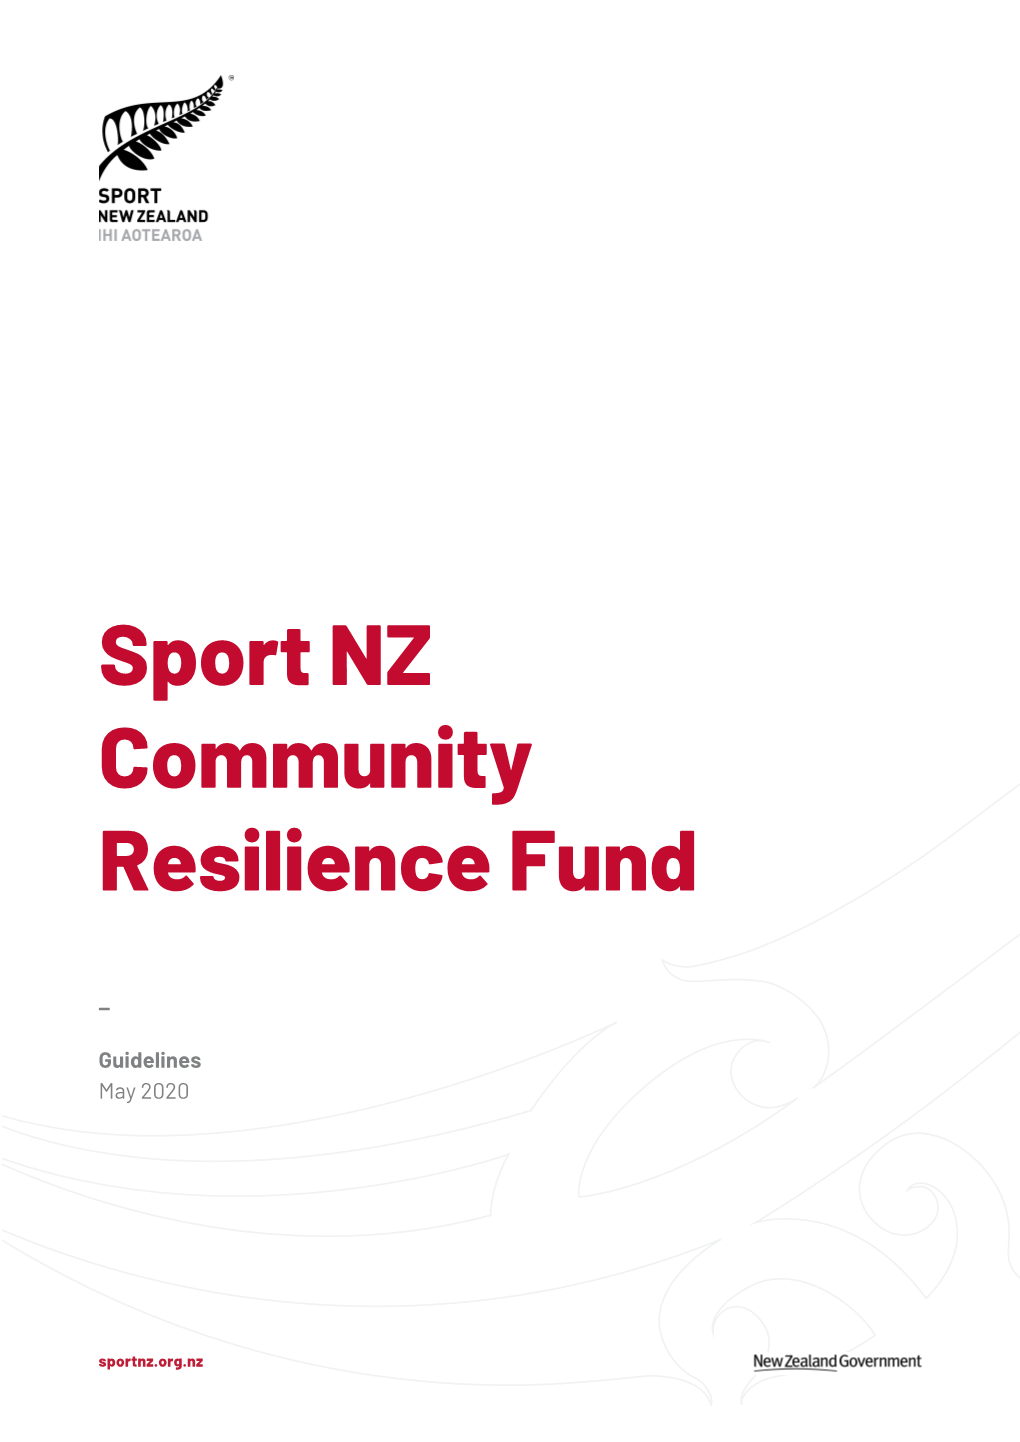 Sport NZ Community Resilience Fund (The Fund) Forms Part of This Relief Package